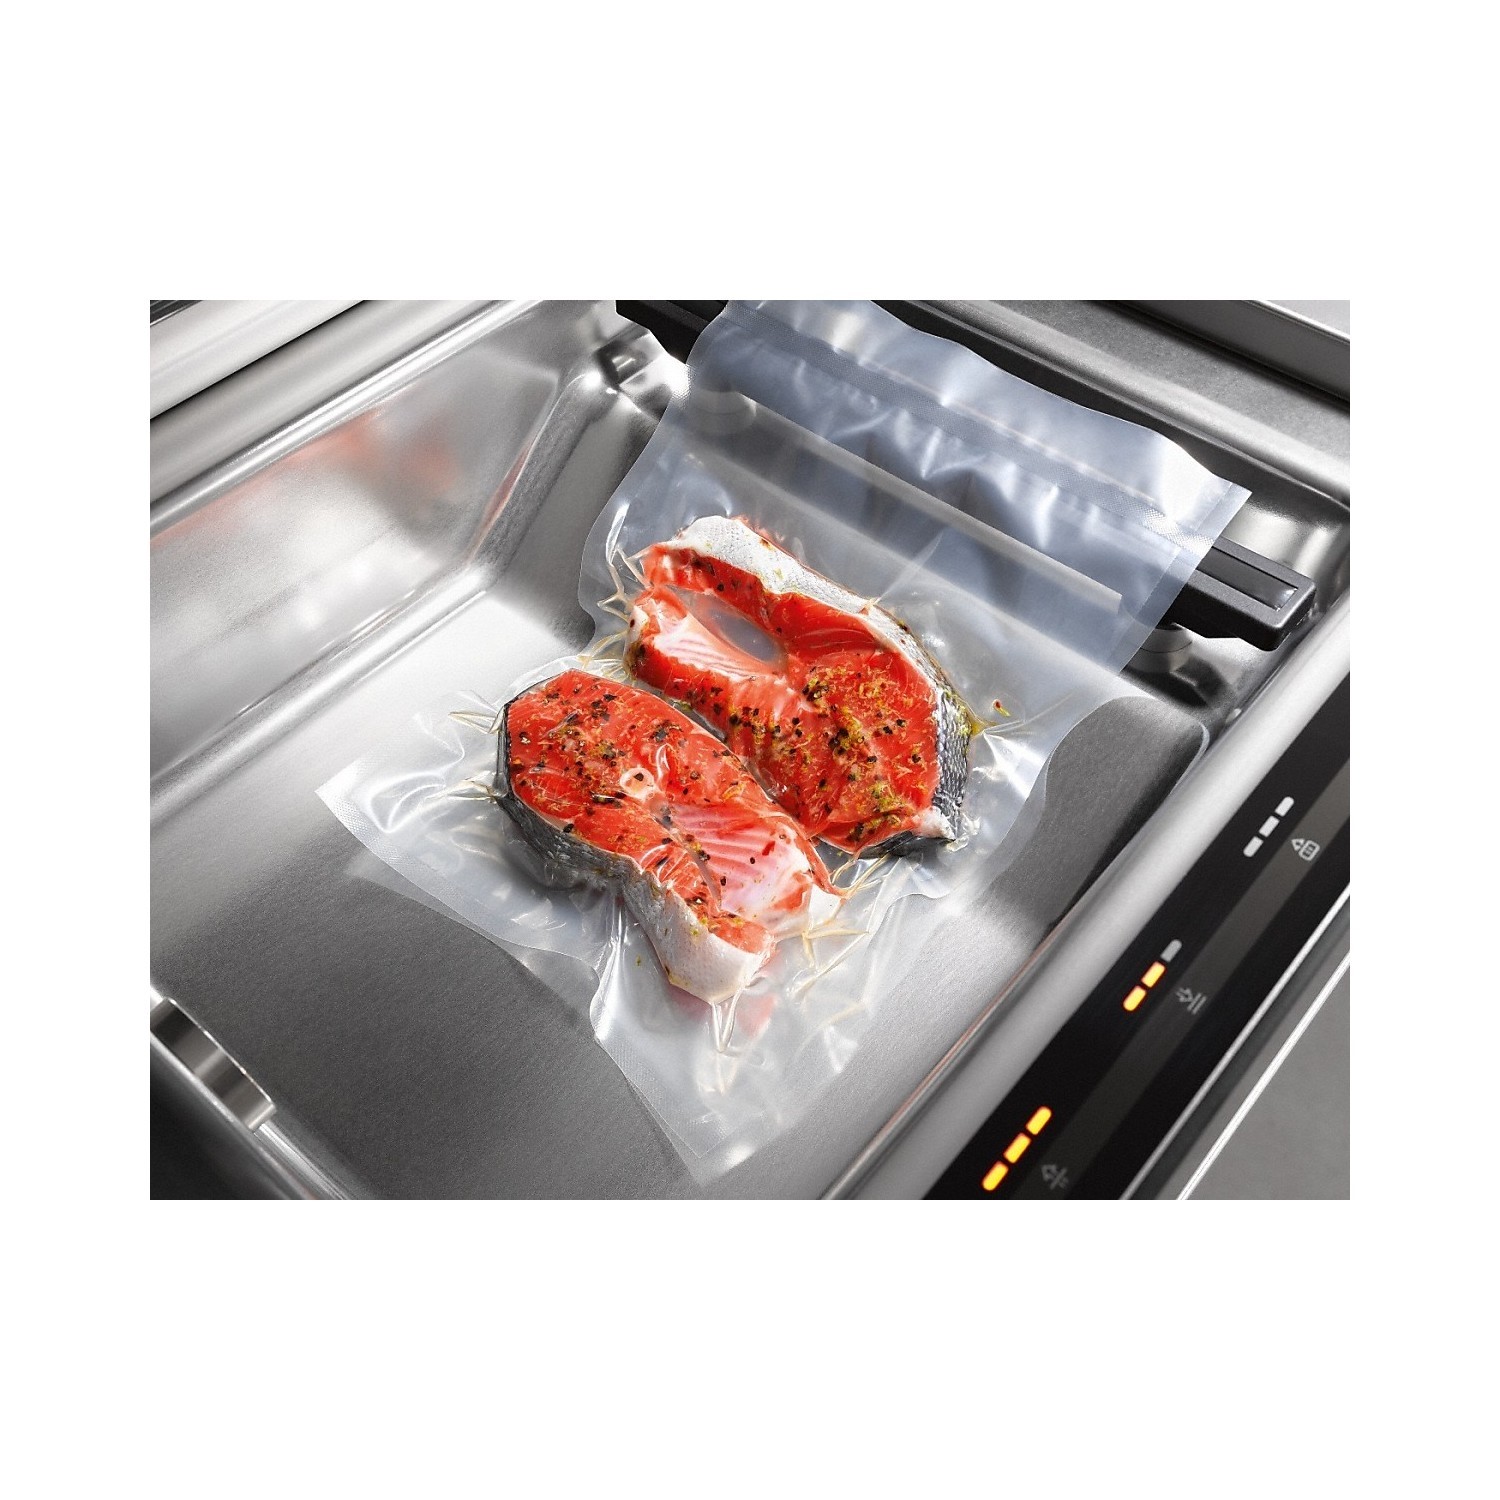 Miele EVS6214 14cm High Vacuum Drawer For Sous Vide Cooking - Black ...